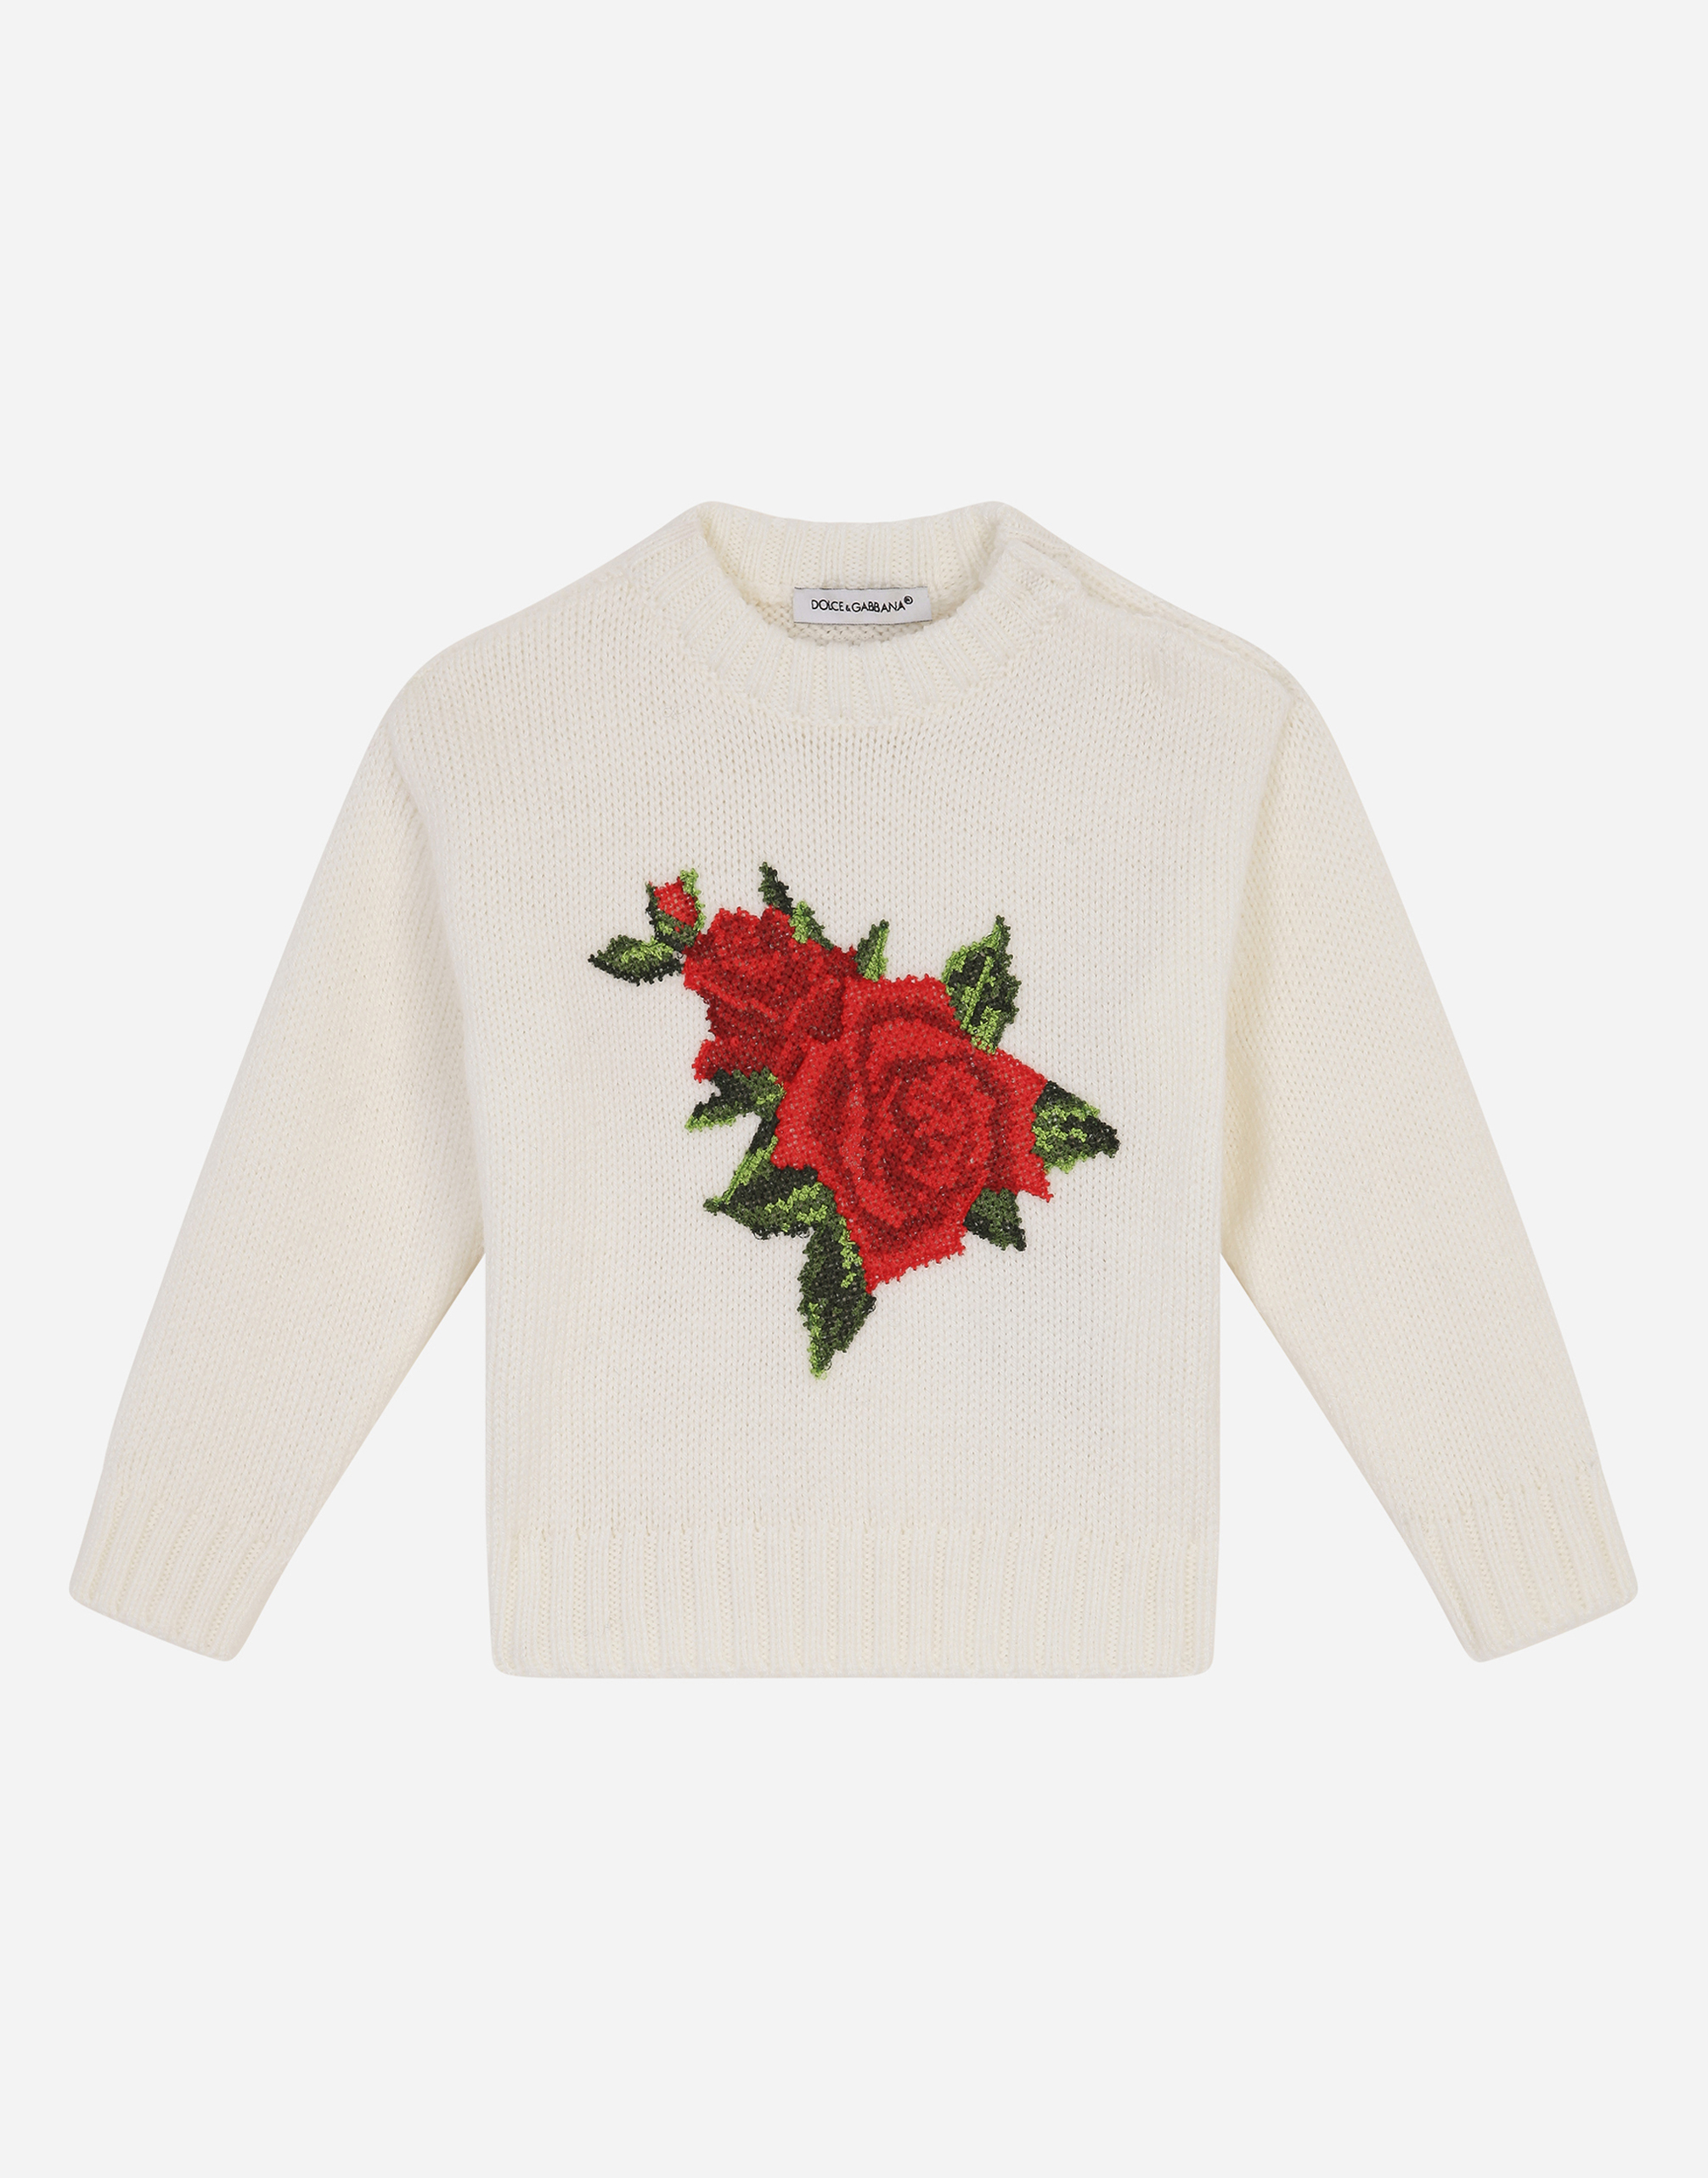 DOLCE & GABBANA Round-neck knit pullover with crochet rose patch